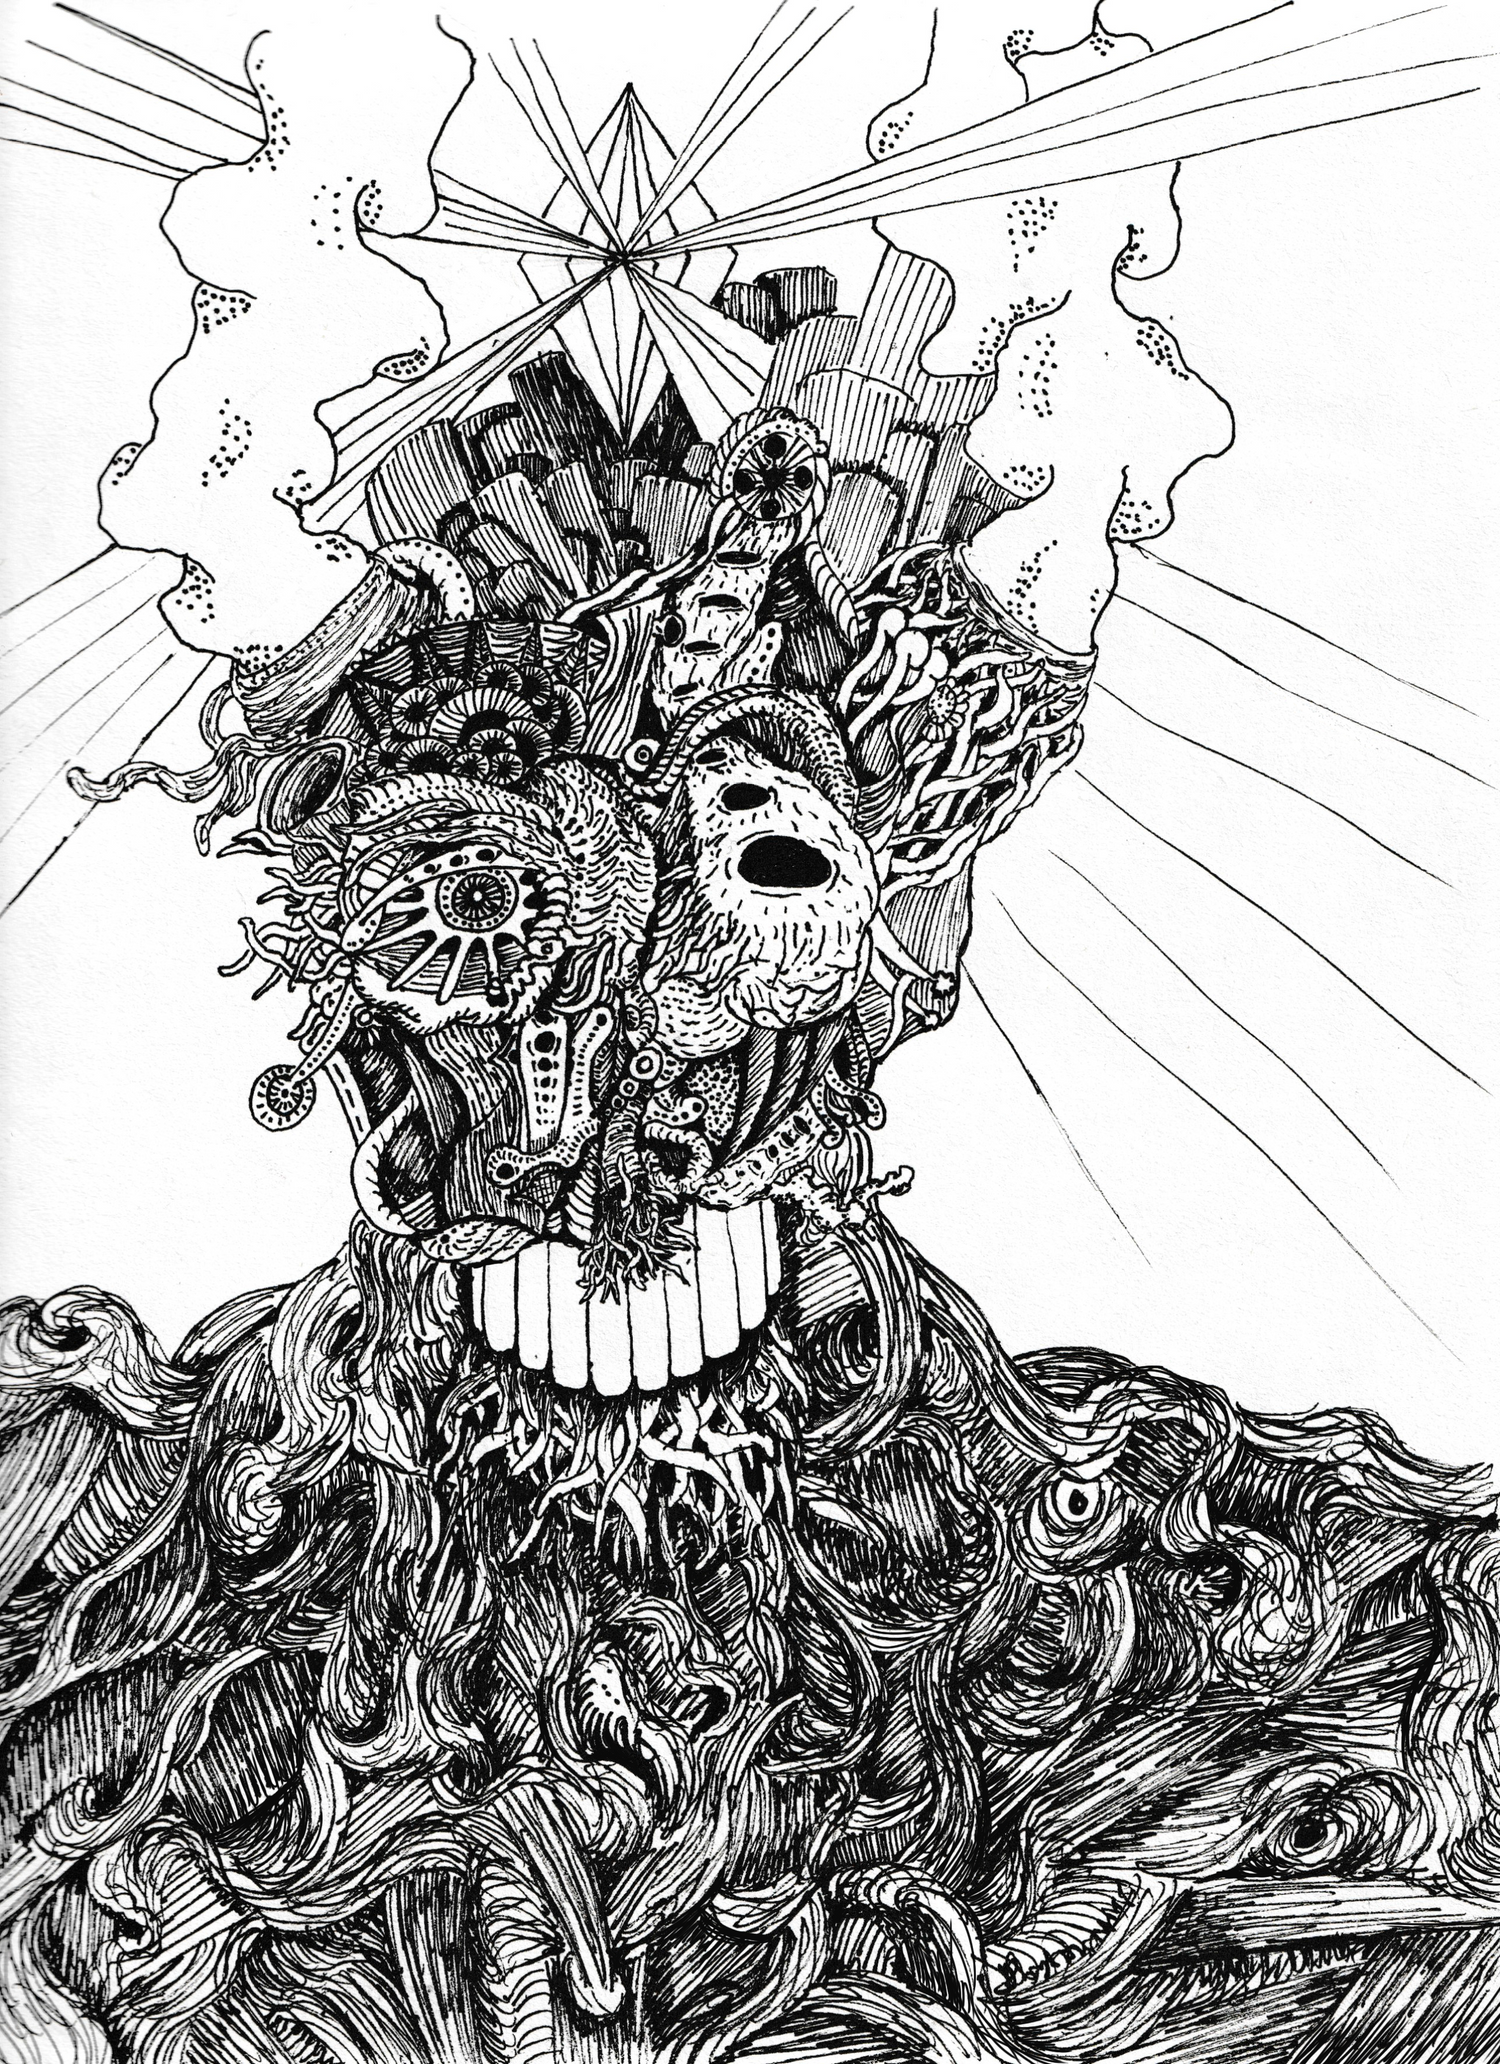 <img src="portrait of an alien.png" alt="black and white ultra detailed fineliner drawing of an alien species created by chief drawing bob is the aliens name">